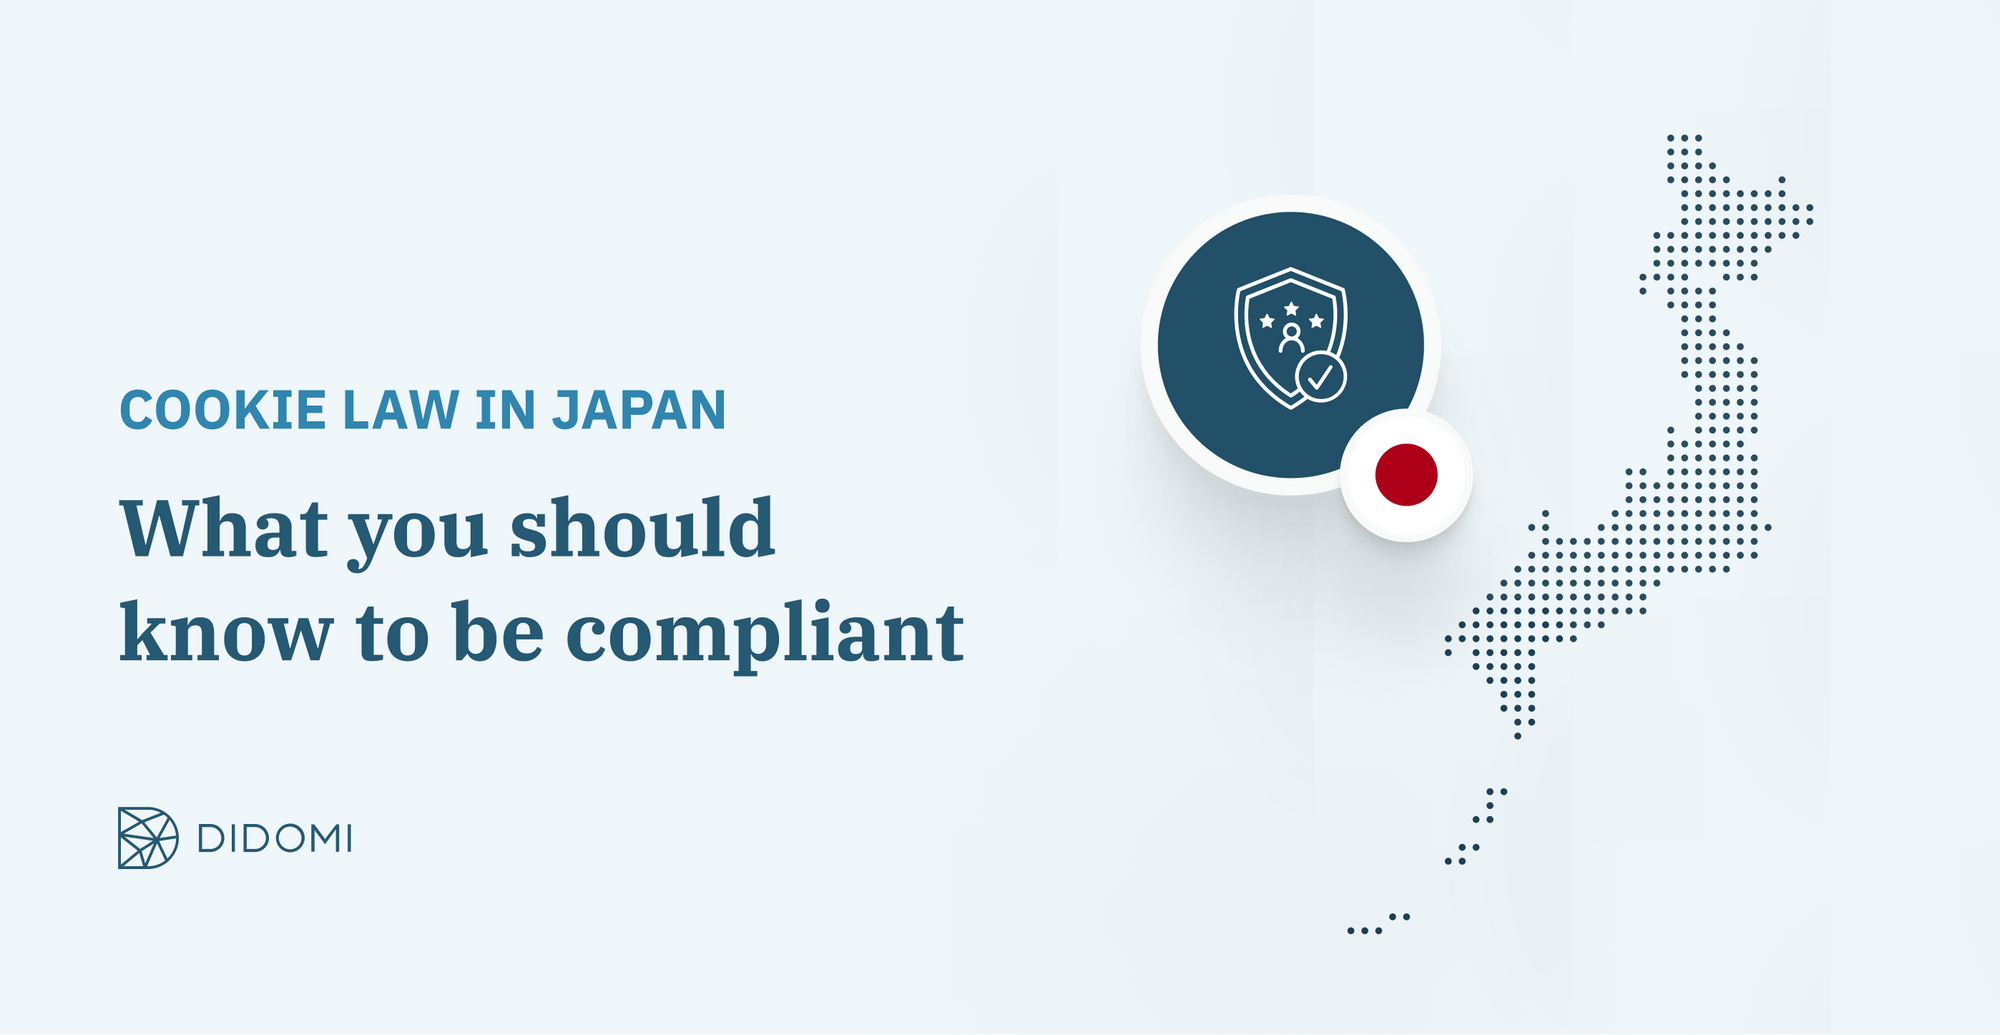 data privacy laws in japan - Everything you should know to be compliant with the APPI